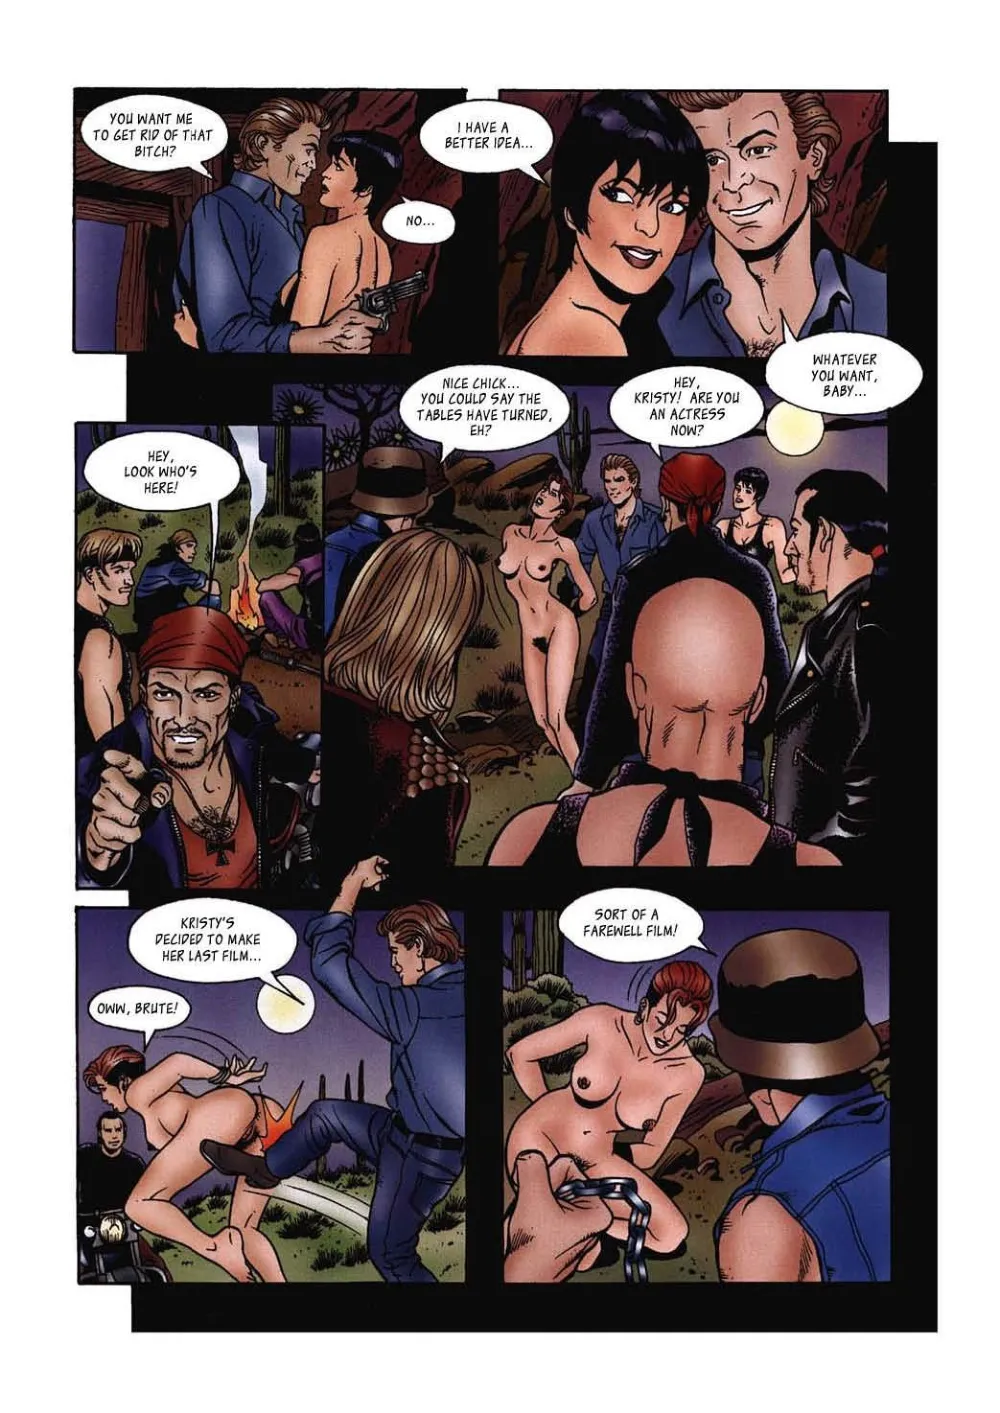 Kristy’s Cafe -Donnie B.- (Roberta Morucci) - Page 36